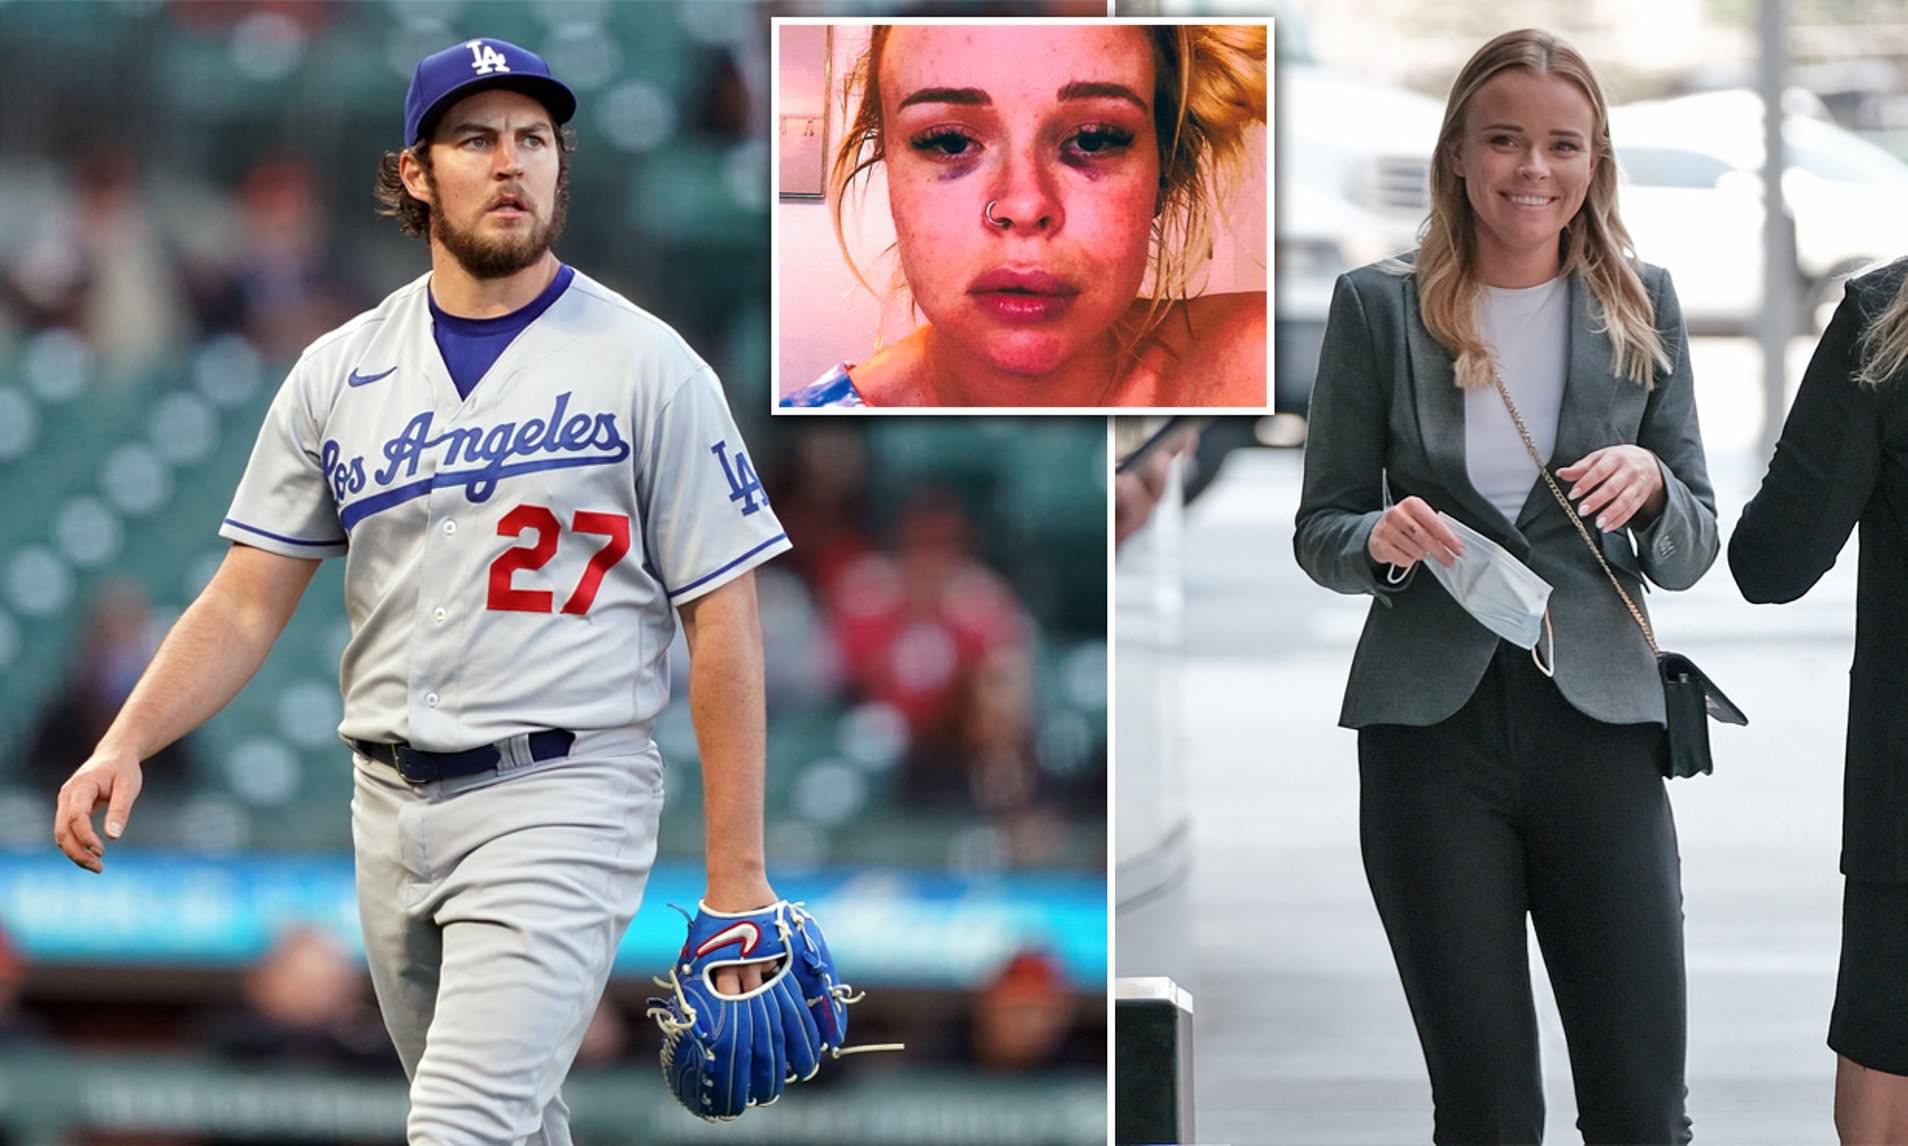 trevor-bauer-lindsey-hill-agree-to-settle-lawsuits-with-each-other